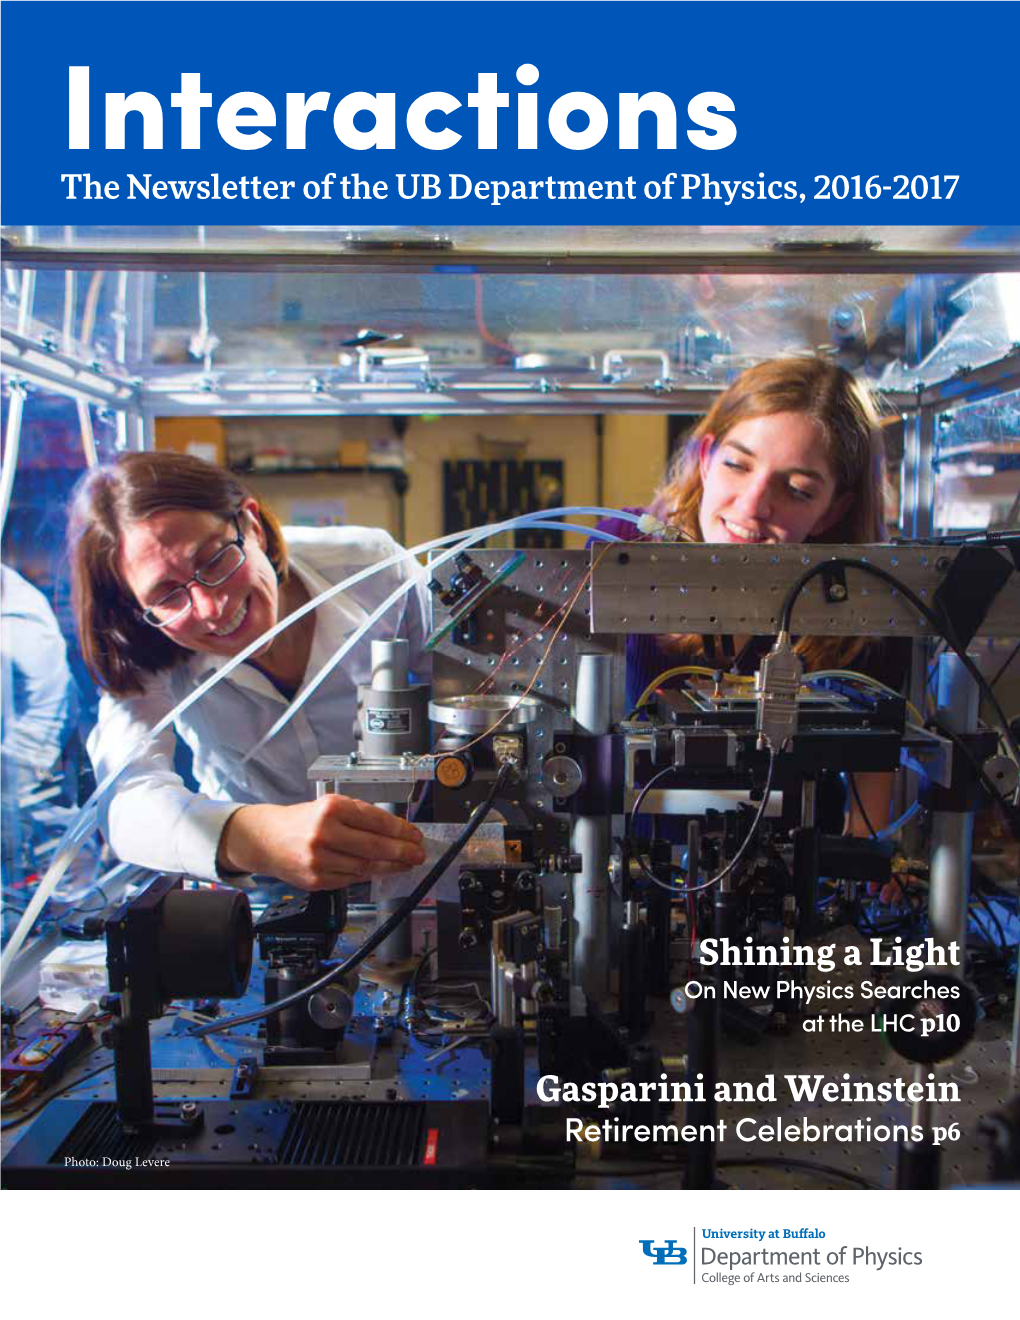 The Newsletter of the UB Department of Physics, 2016-2017